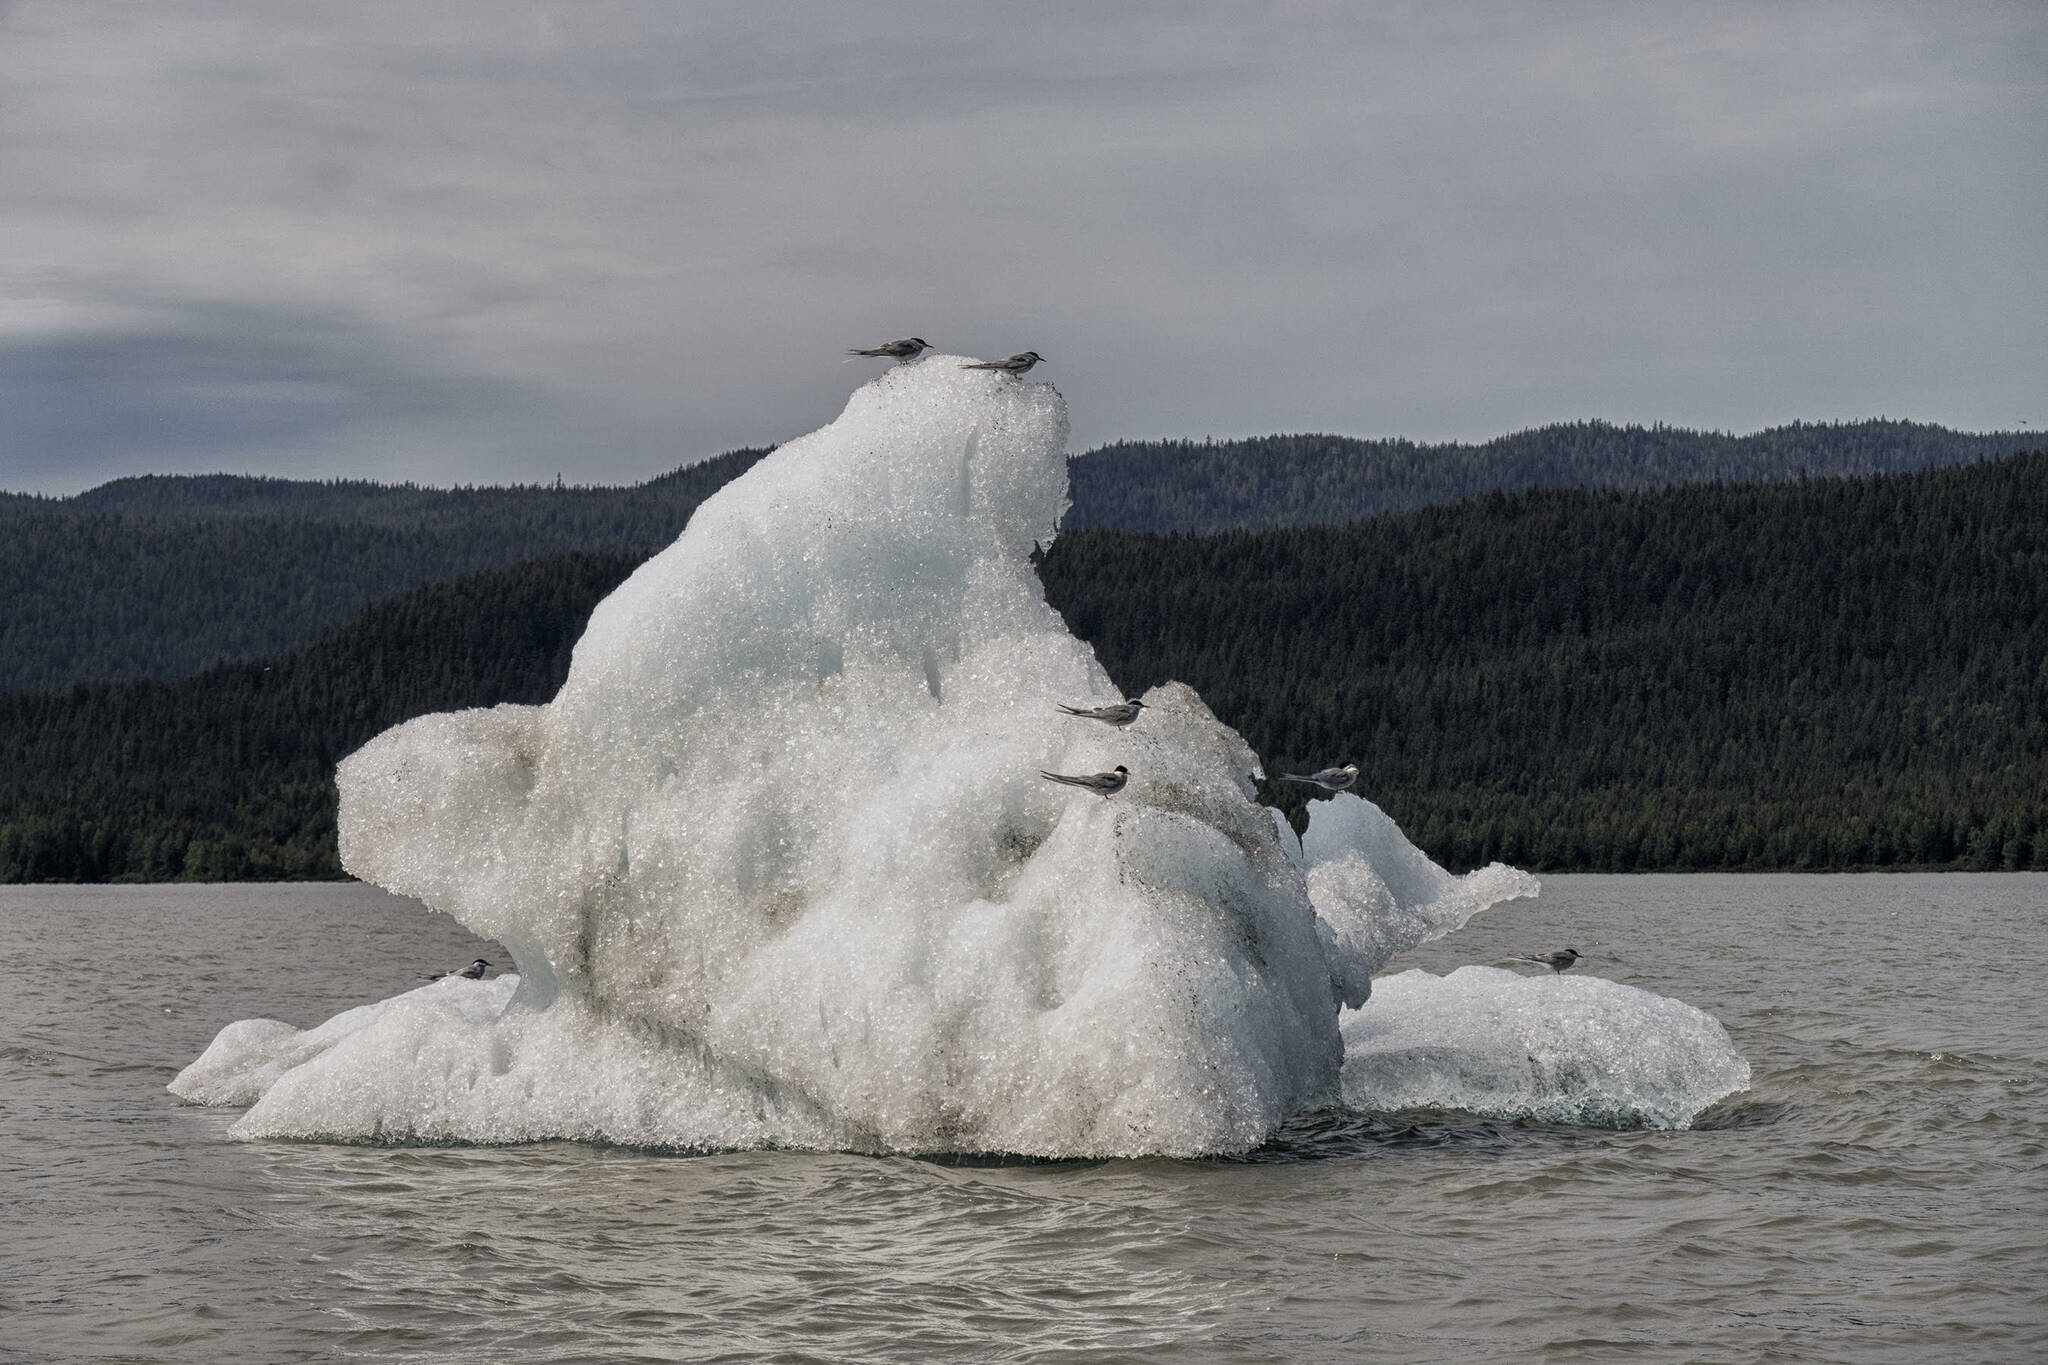 Arctic Terns perch on a recent iceberg from the Mendenhall Glacier on July 14. (Courtesy Photo / Kenneth Gill, gillfoto)